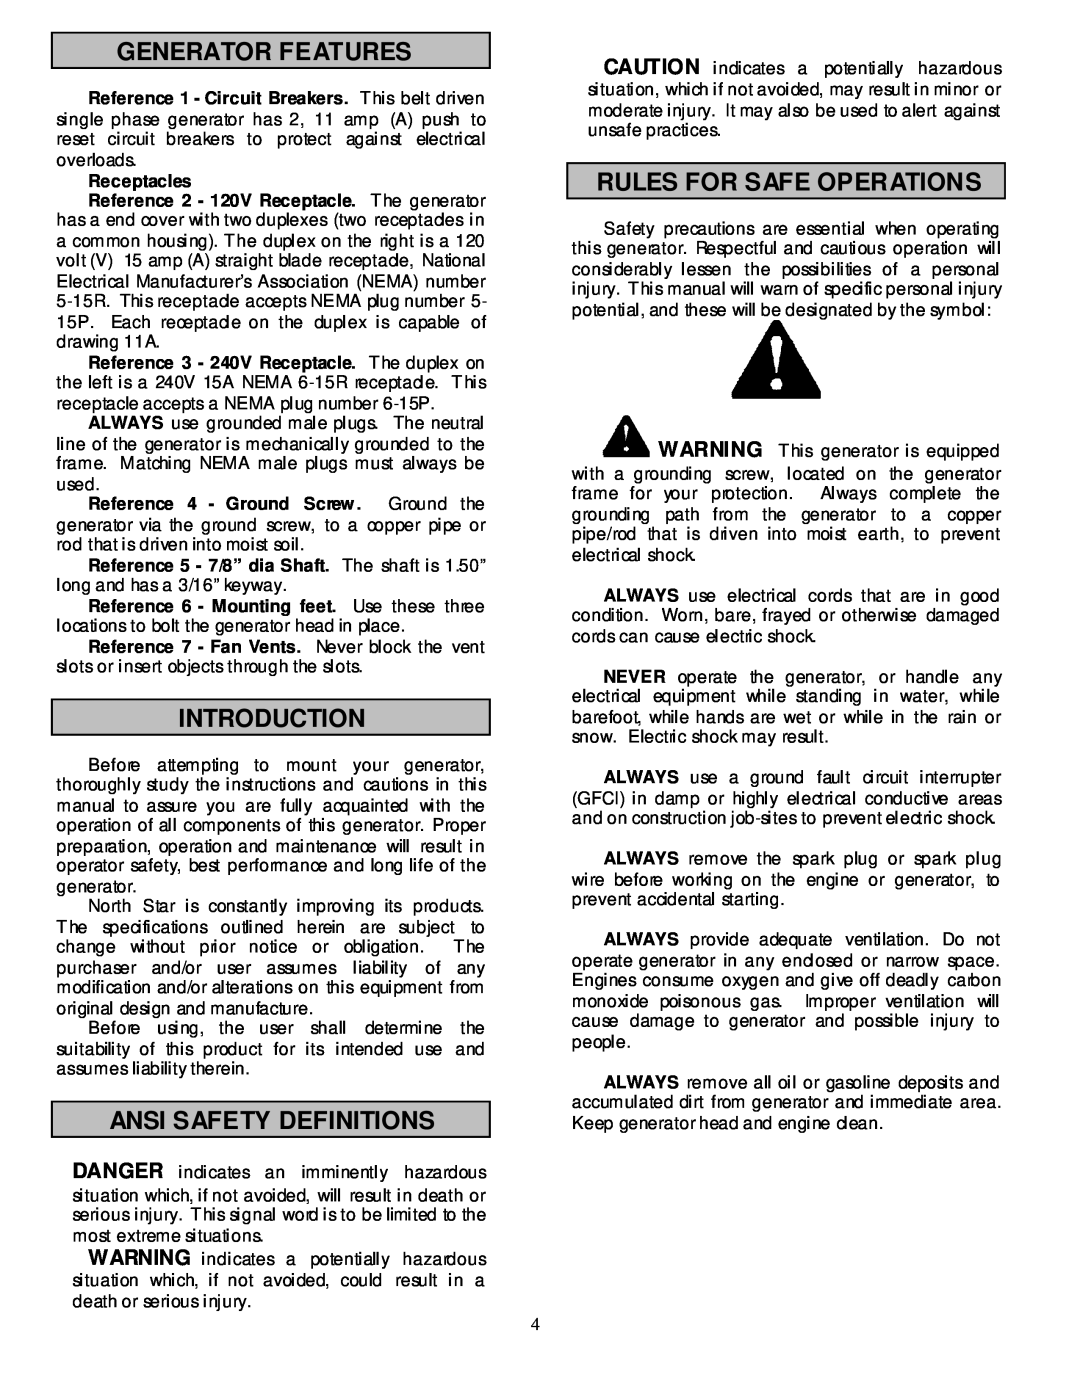 North Star 2900 owner manual Generator Features, Introduction, Ansi Safety Definitions, Rules For Safe Operations 